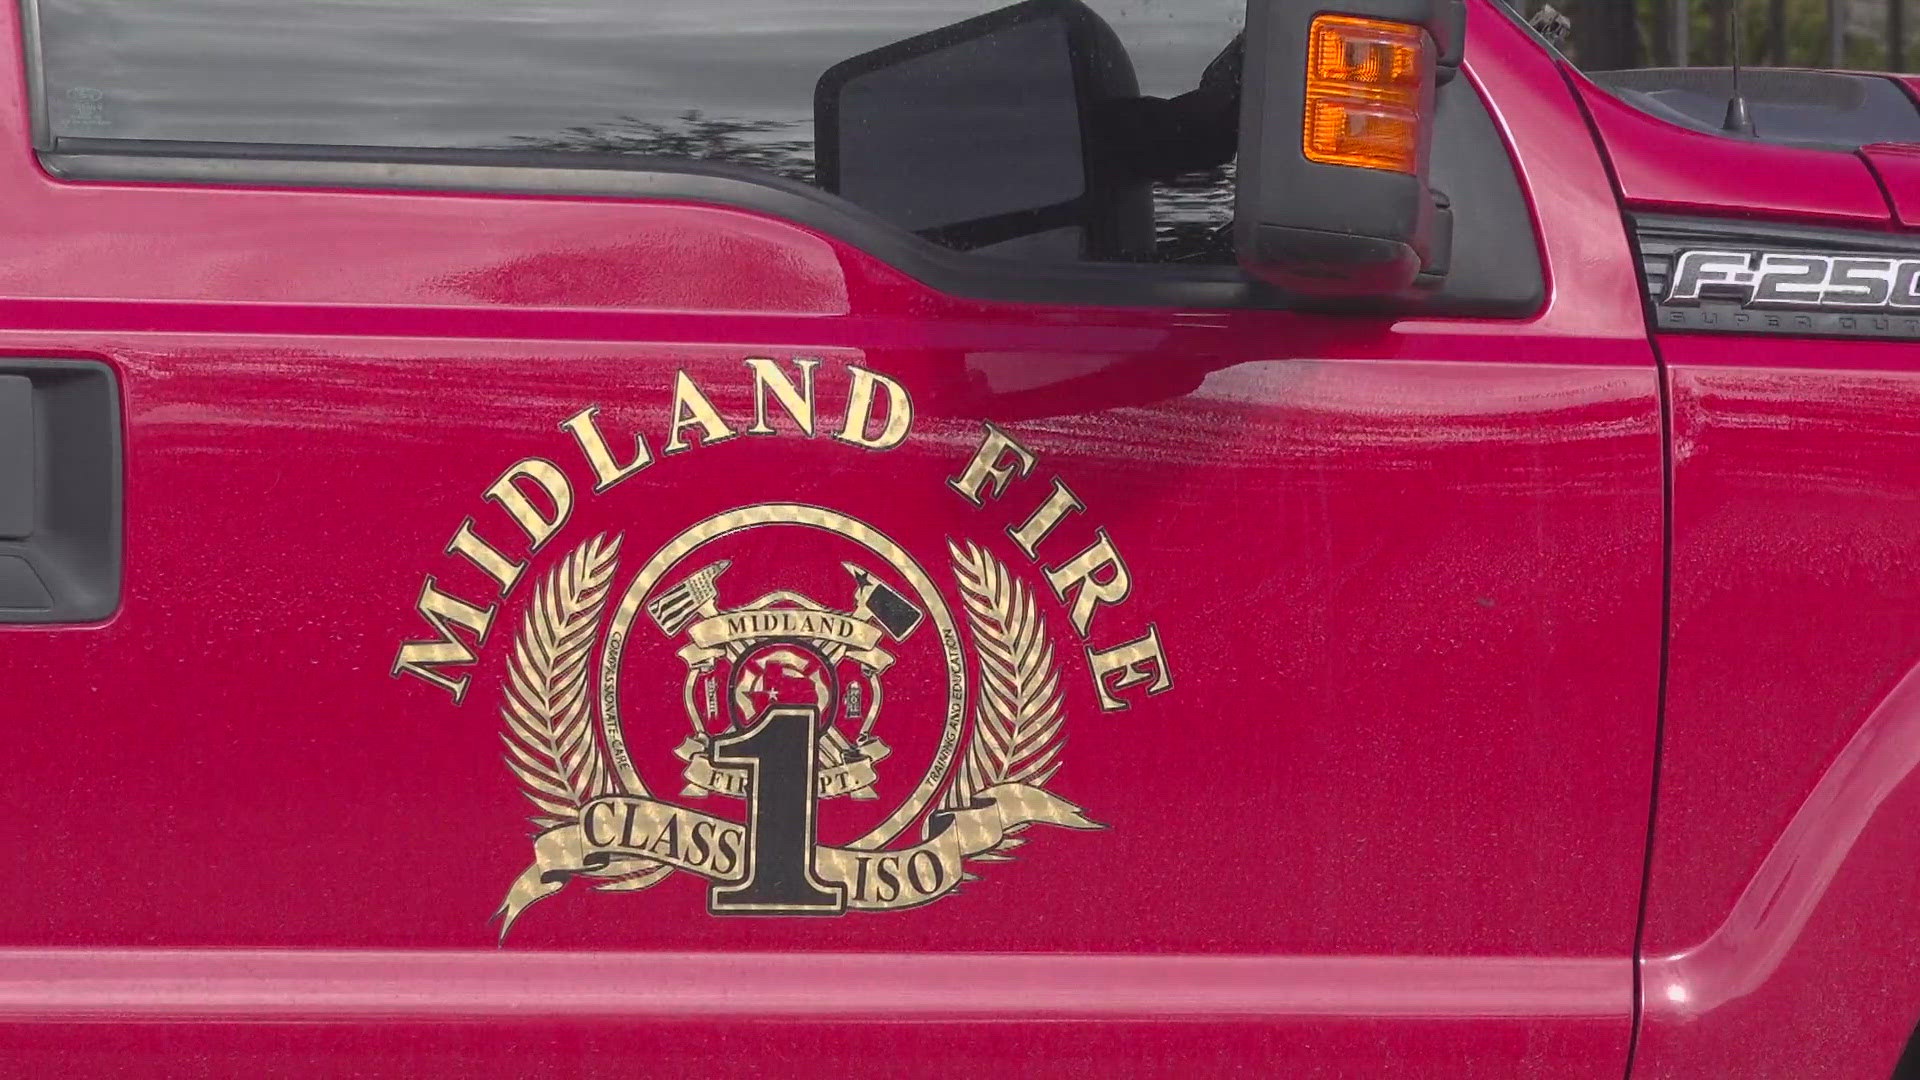 Midland Fire Department's Retirement pension fund has been by an amount of $109 million.